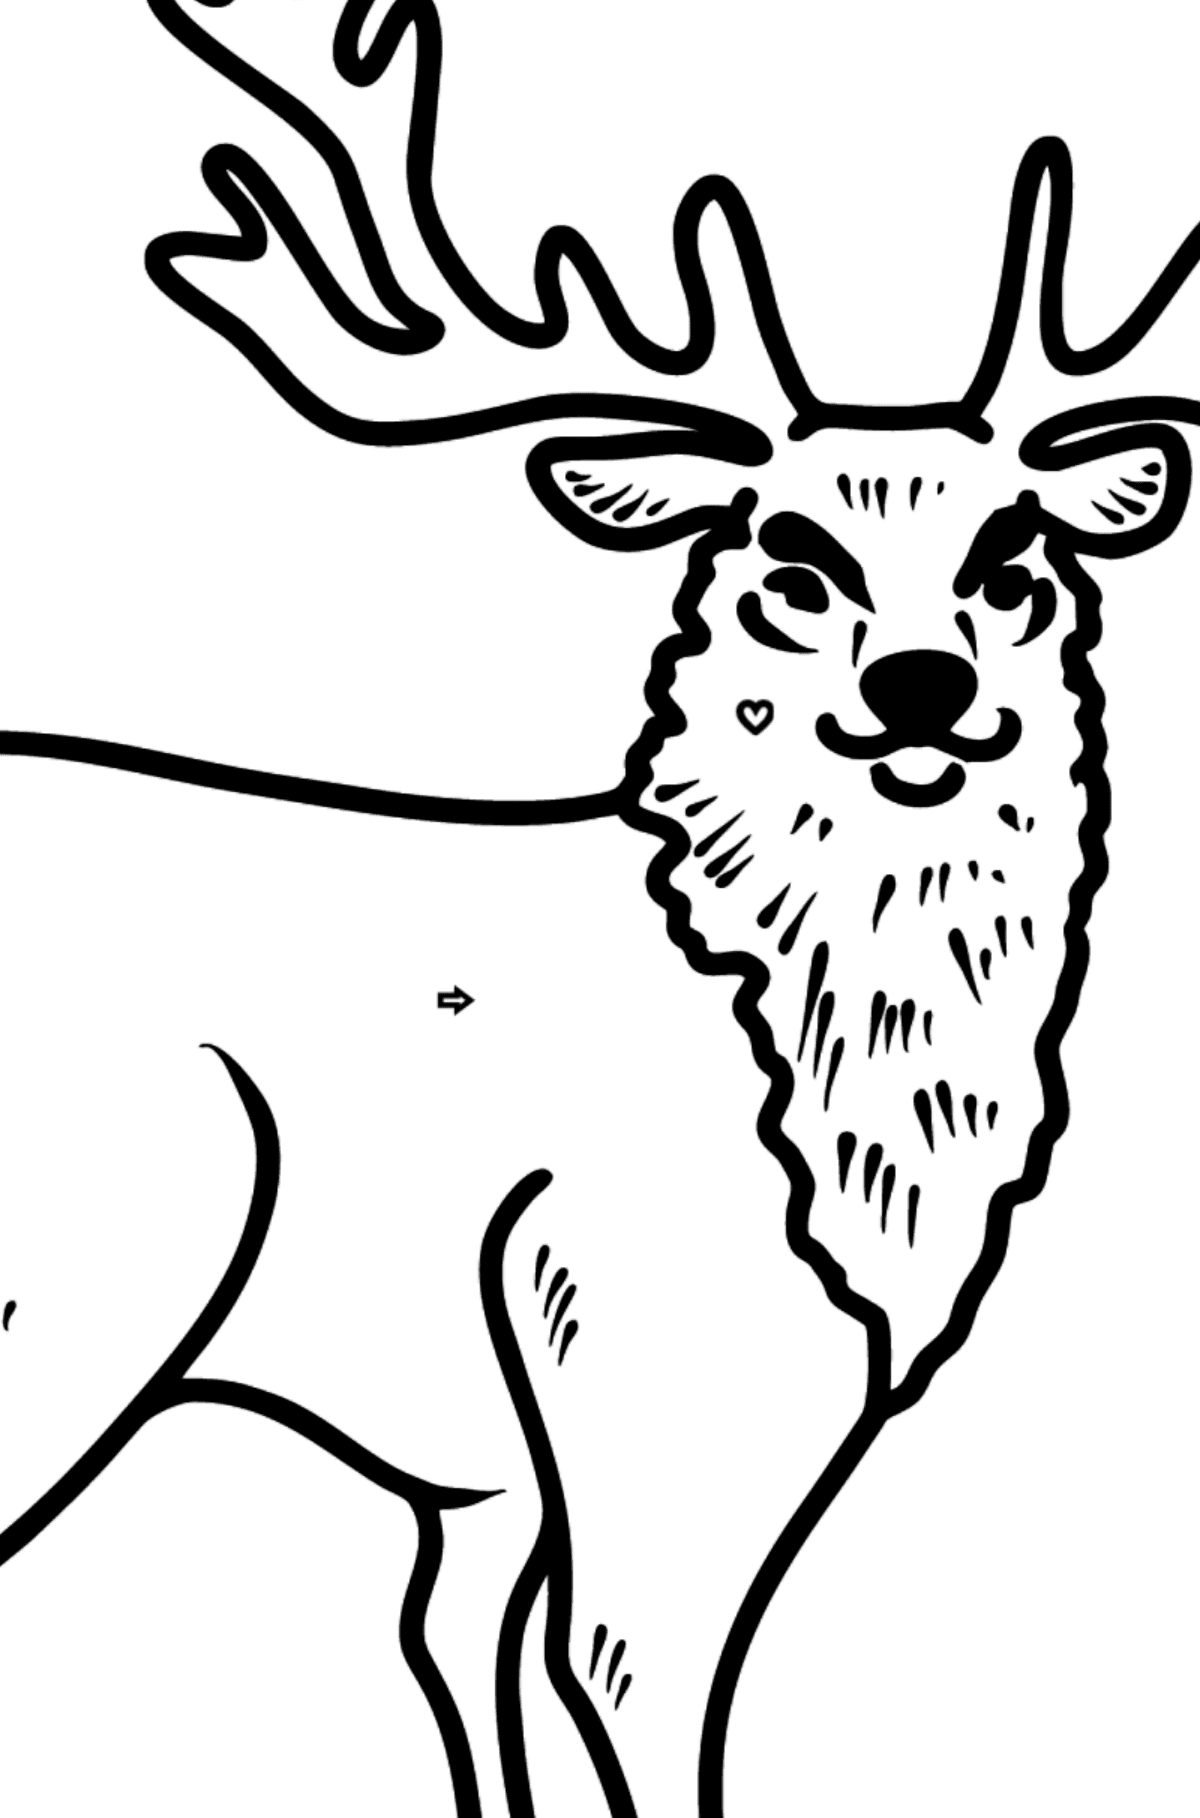 Deer coloring page - Coloring by Geometric Shapes for Kids